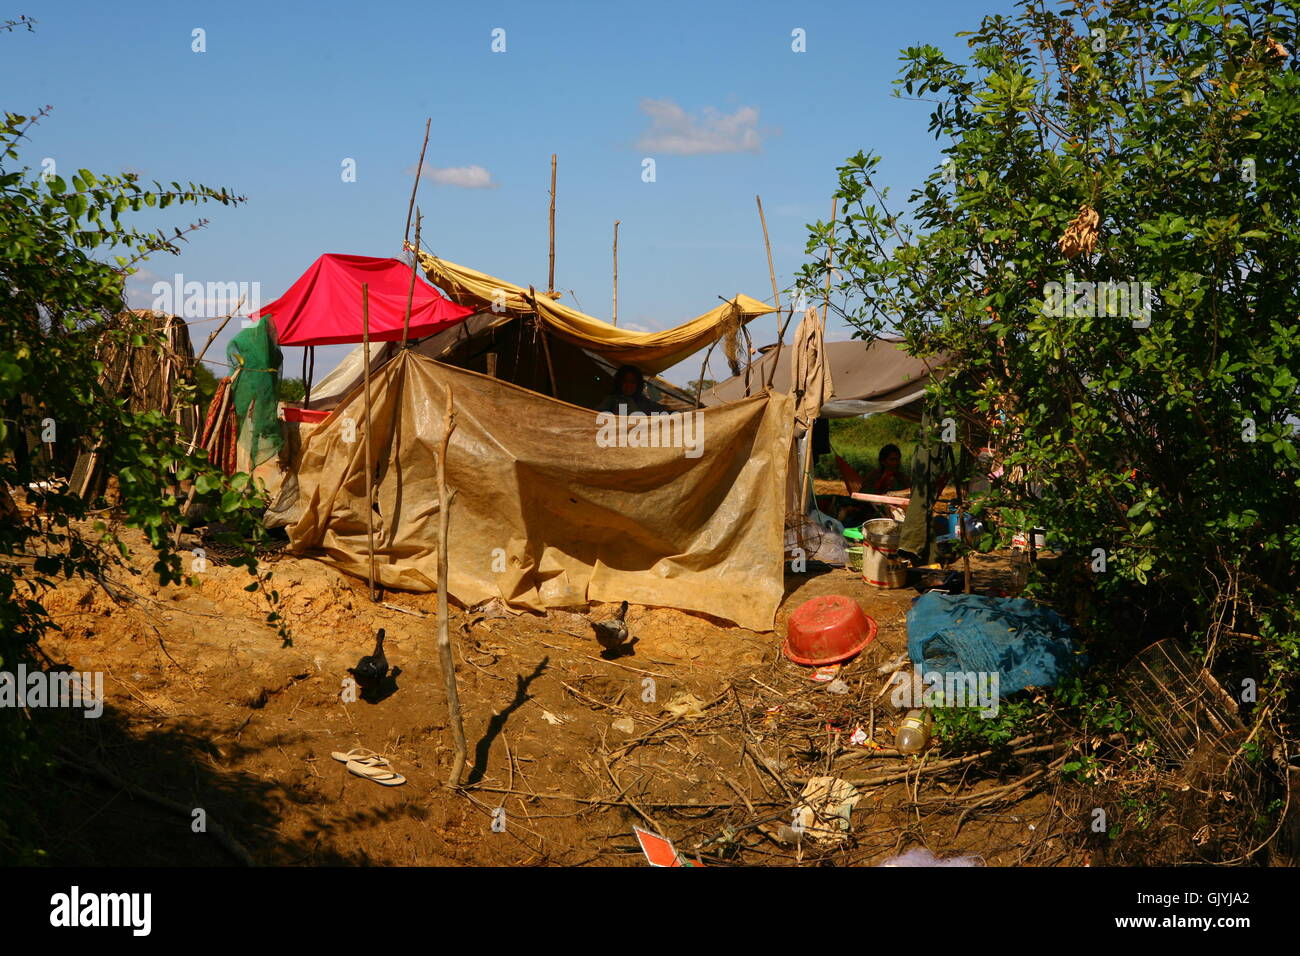 a-shack-made-of-plastic-cardboard-and-stick-where-lives-a-poor-cambodian-GJYJA2.jpg